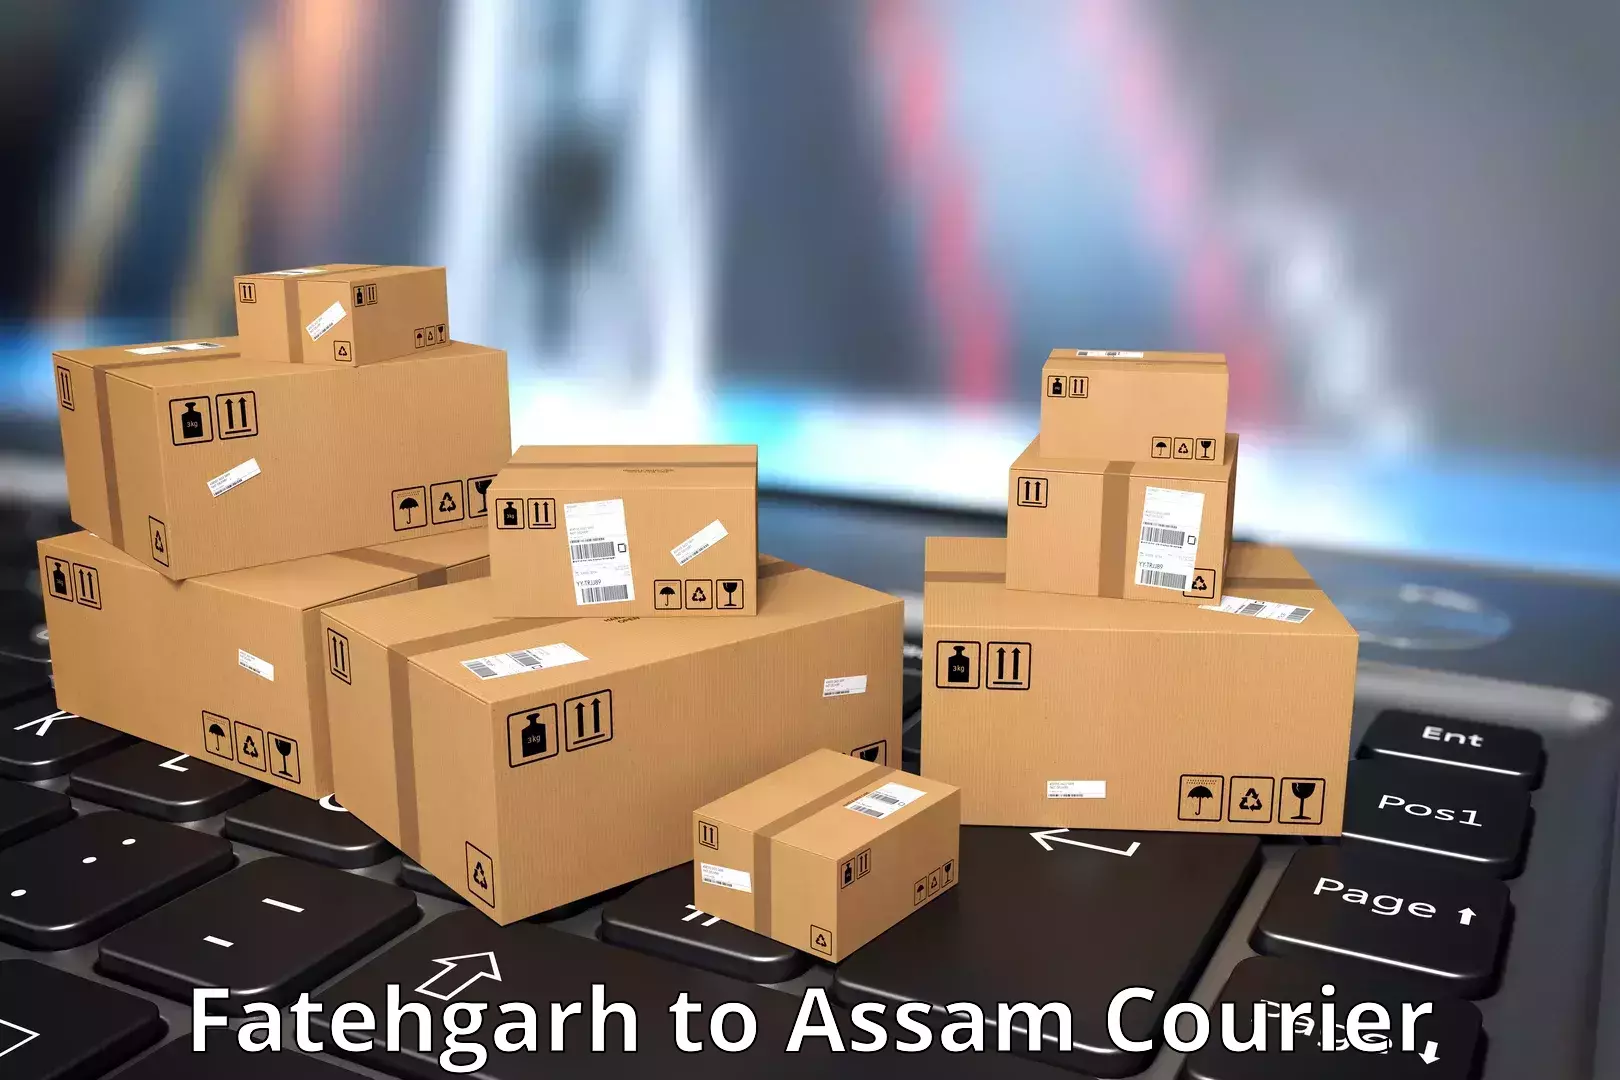 On-demand delivery Fatehgarh to Karbi Anglong